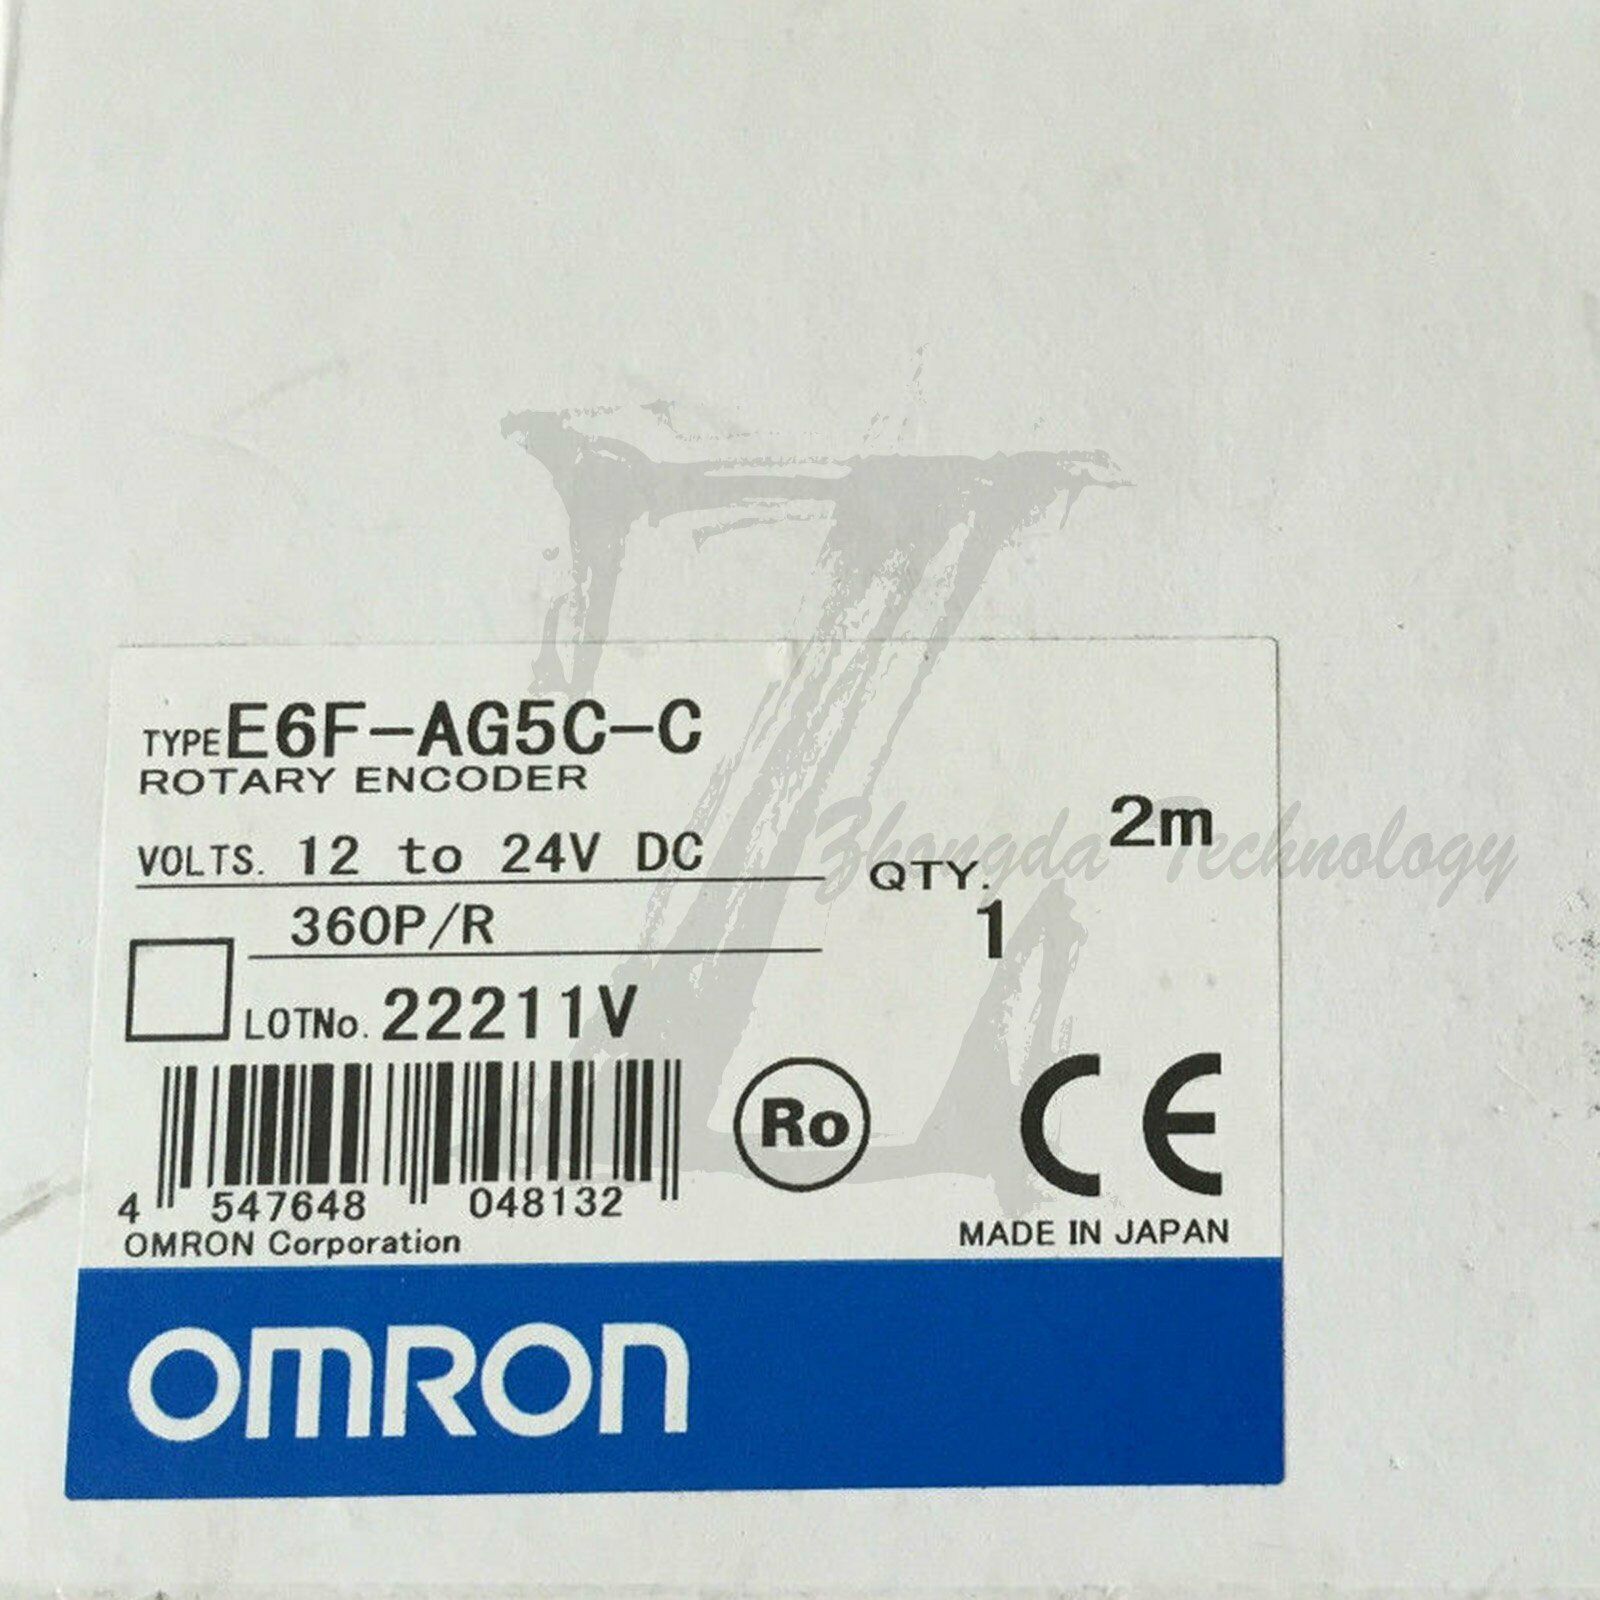 1pc new Omron rotary encoder E6F-AG5C-C module one year warranty KOEED 201-500, 80%, import_2020_10_10_031751, Omron, Other